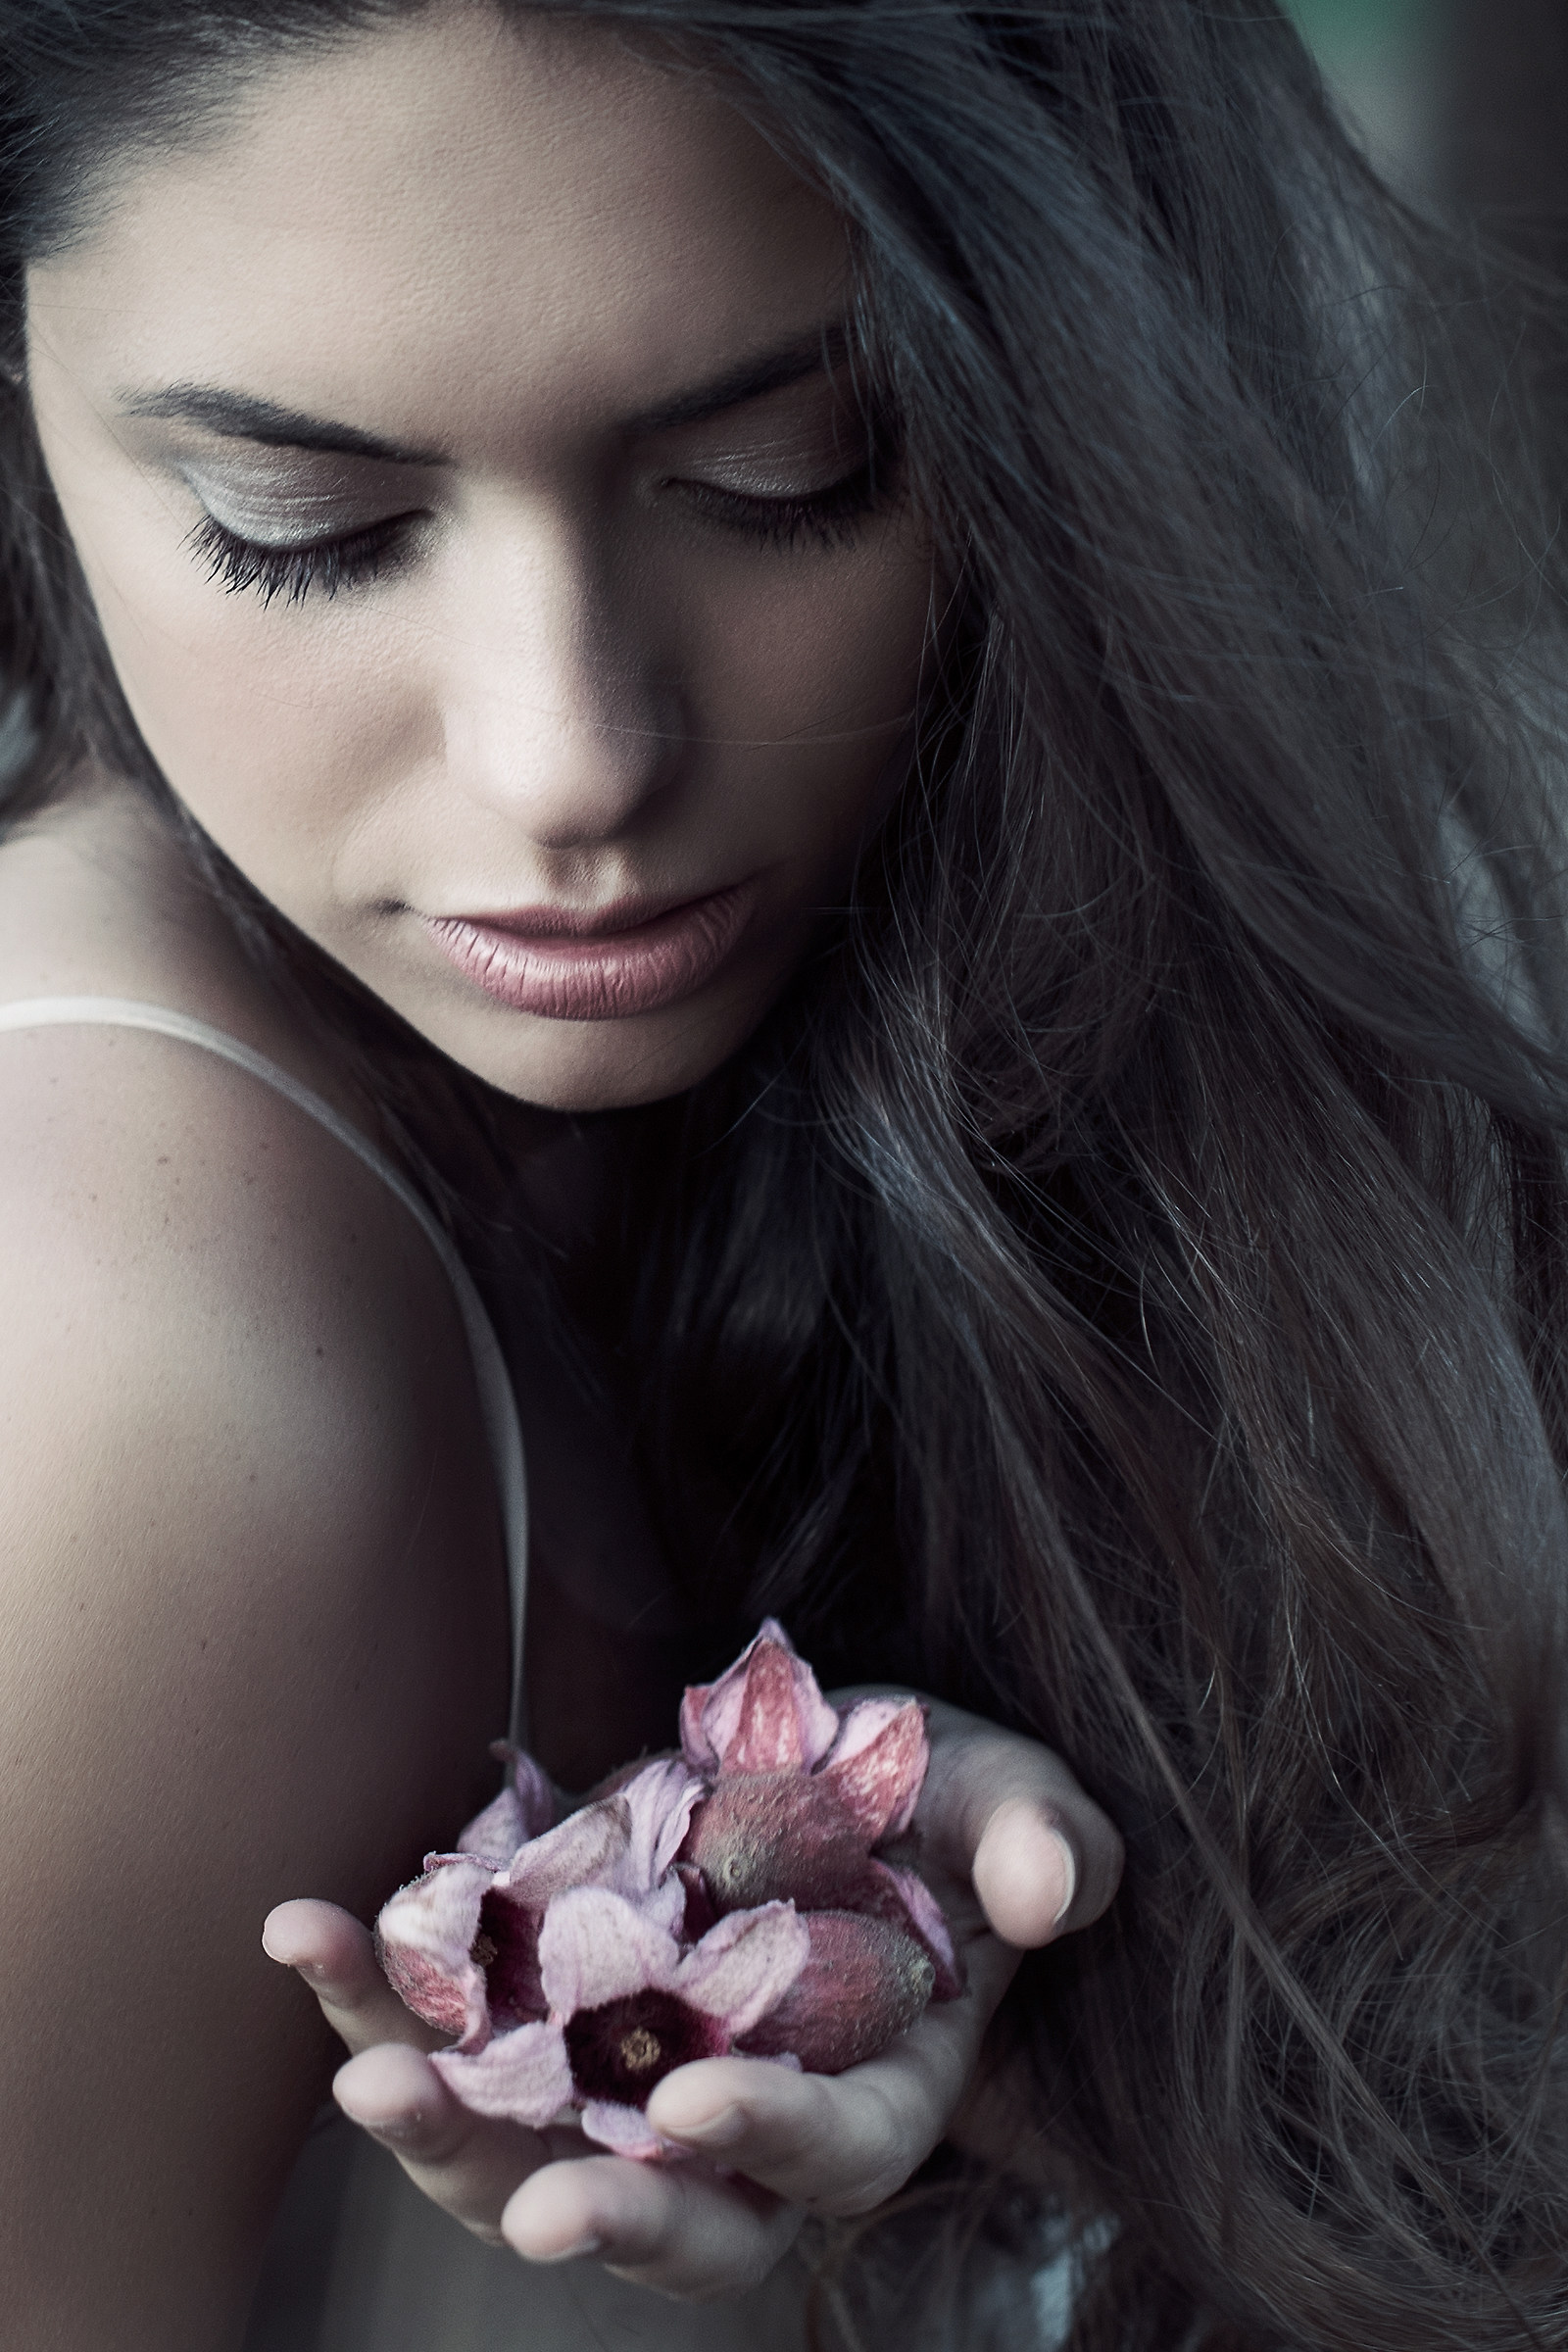 touch me with a flower...